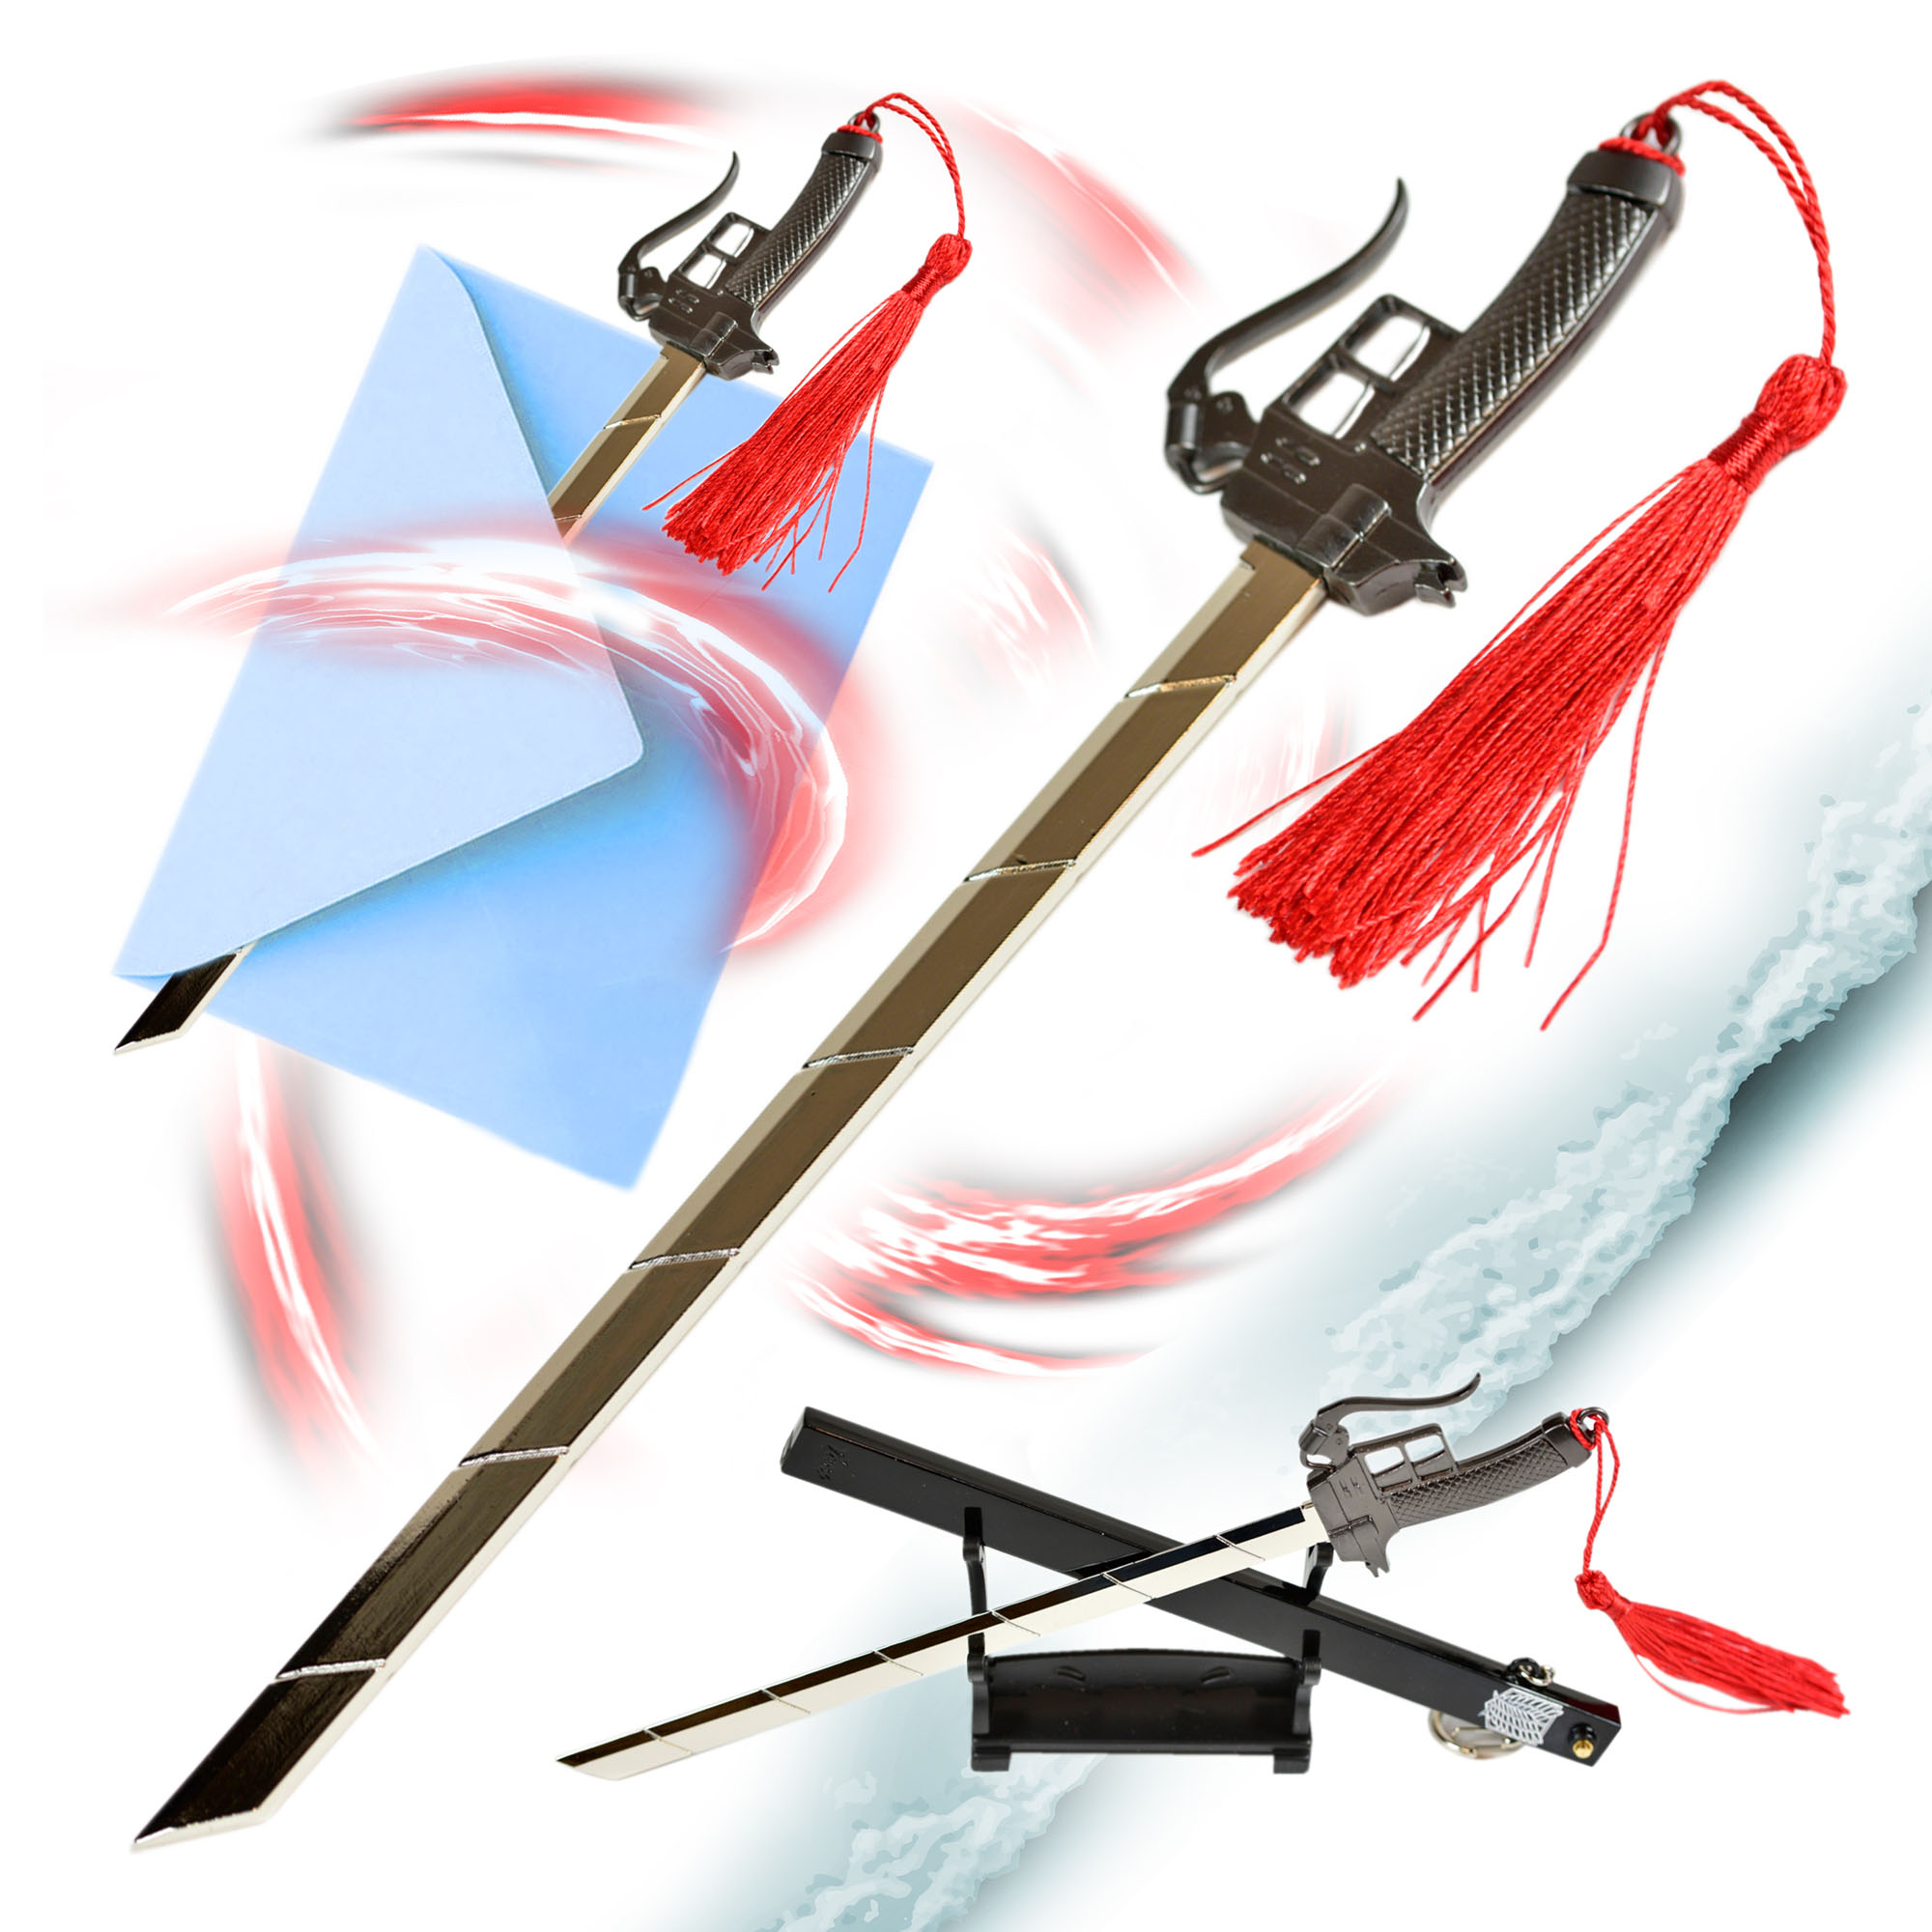 Attack on Titan - Half-blade-sword - Letter opener version with stand 